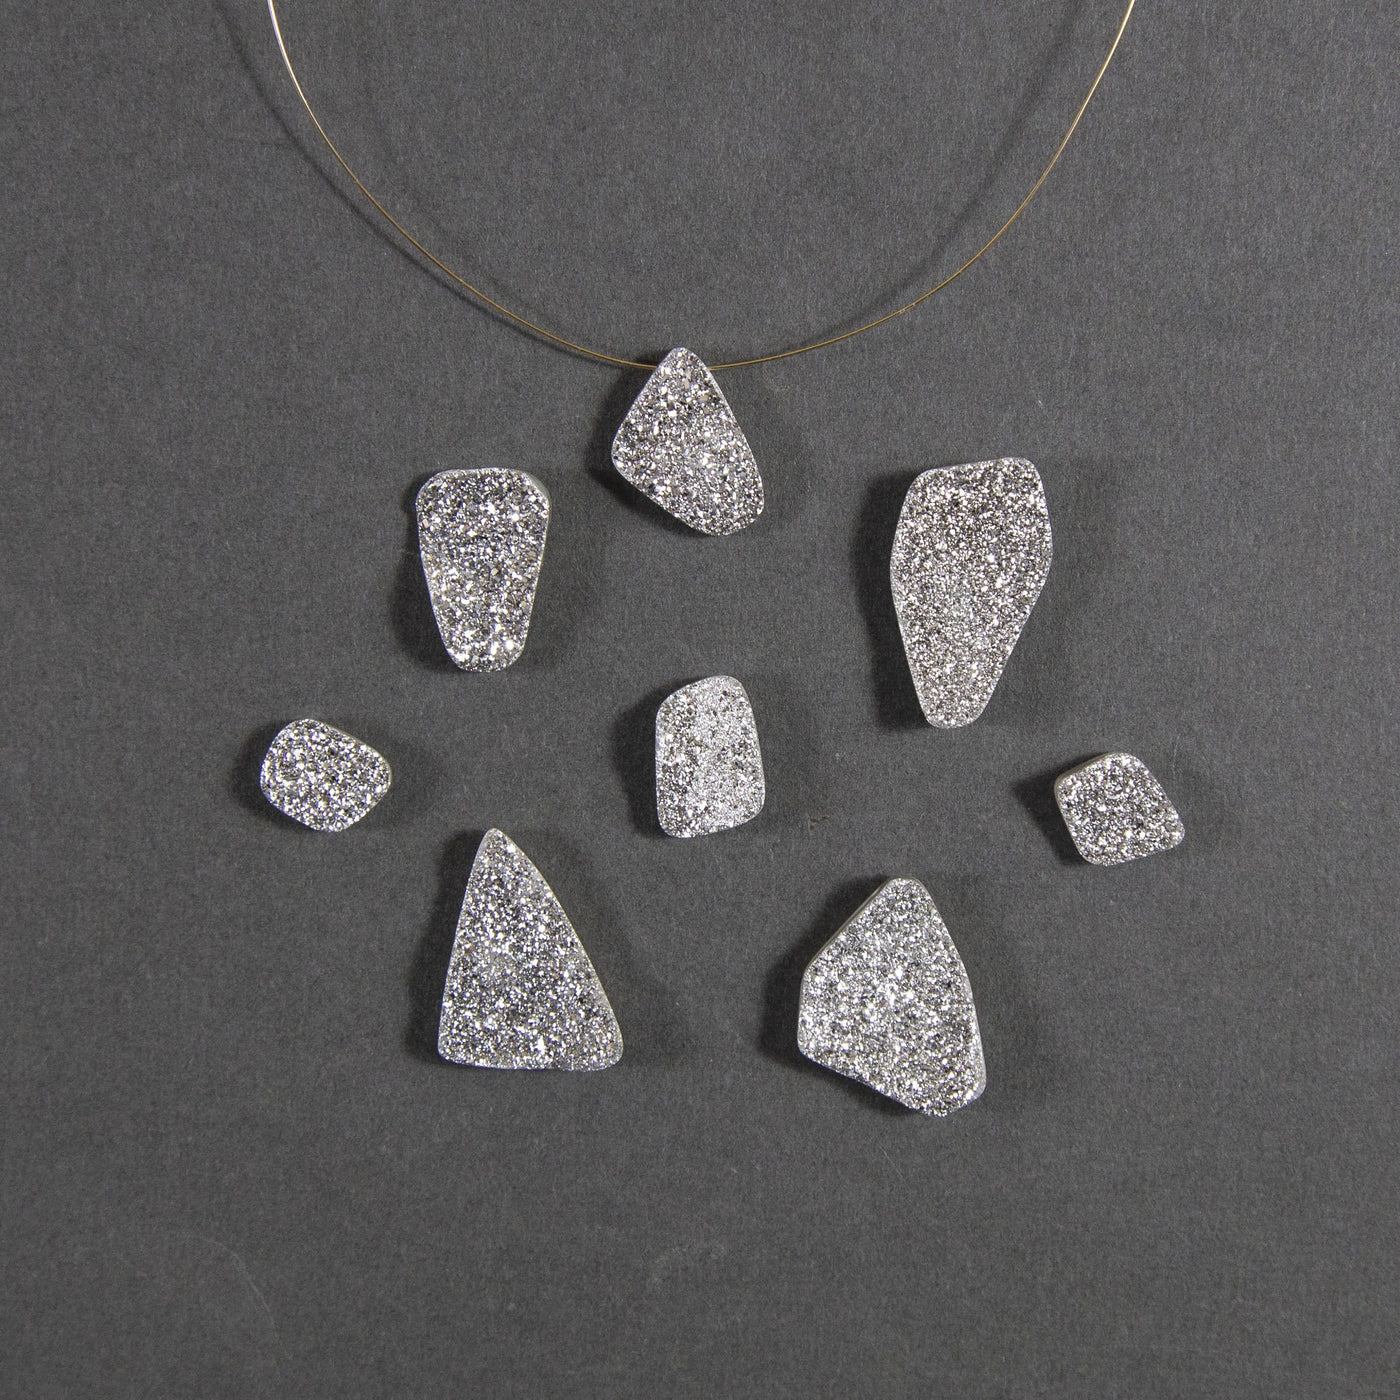 platinum druzy beads displayed with a wire through hole and up close to view various colors textures shapes sizes